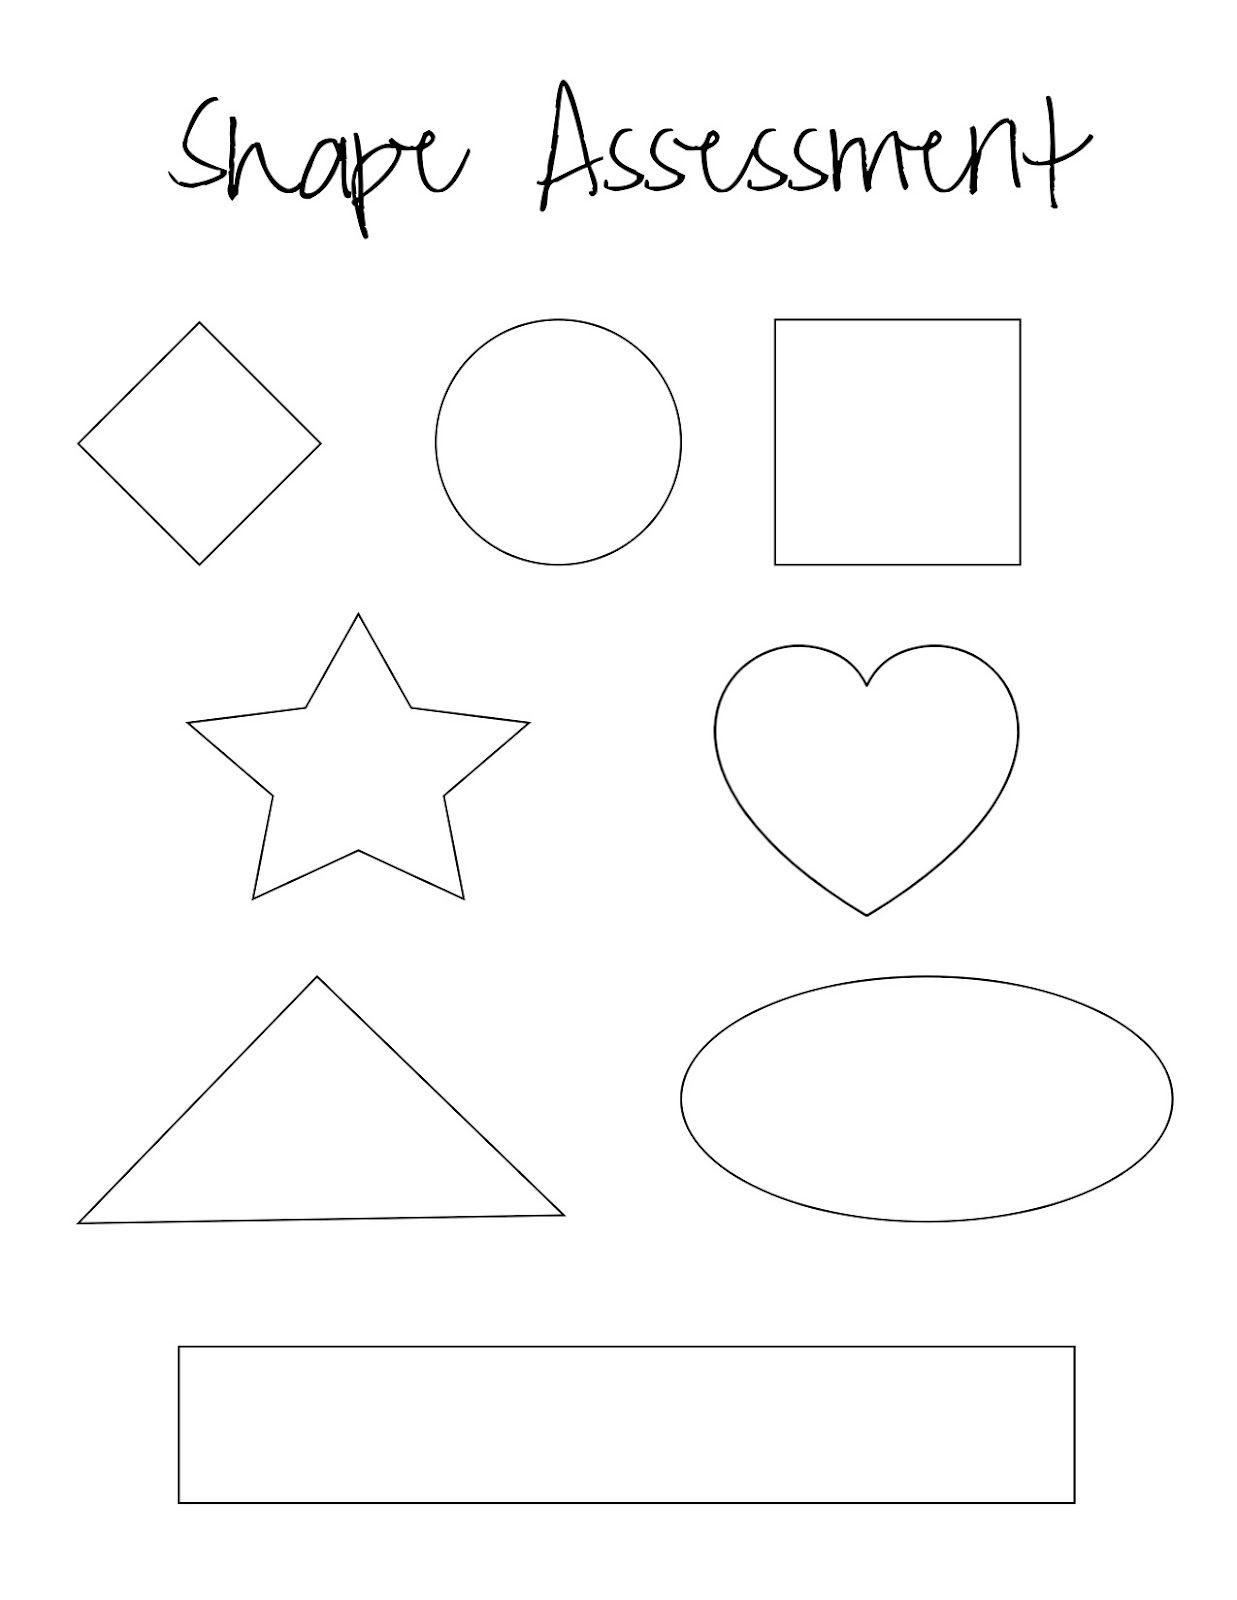 Free Printable Assessment For Shapes